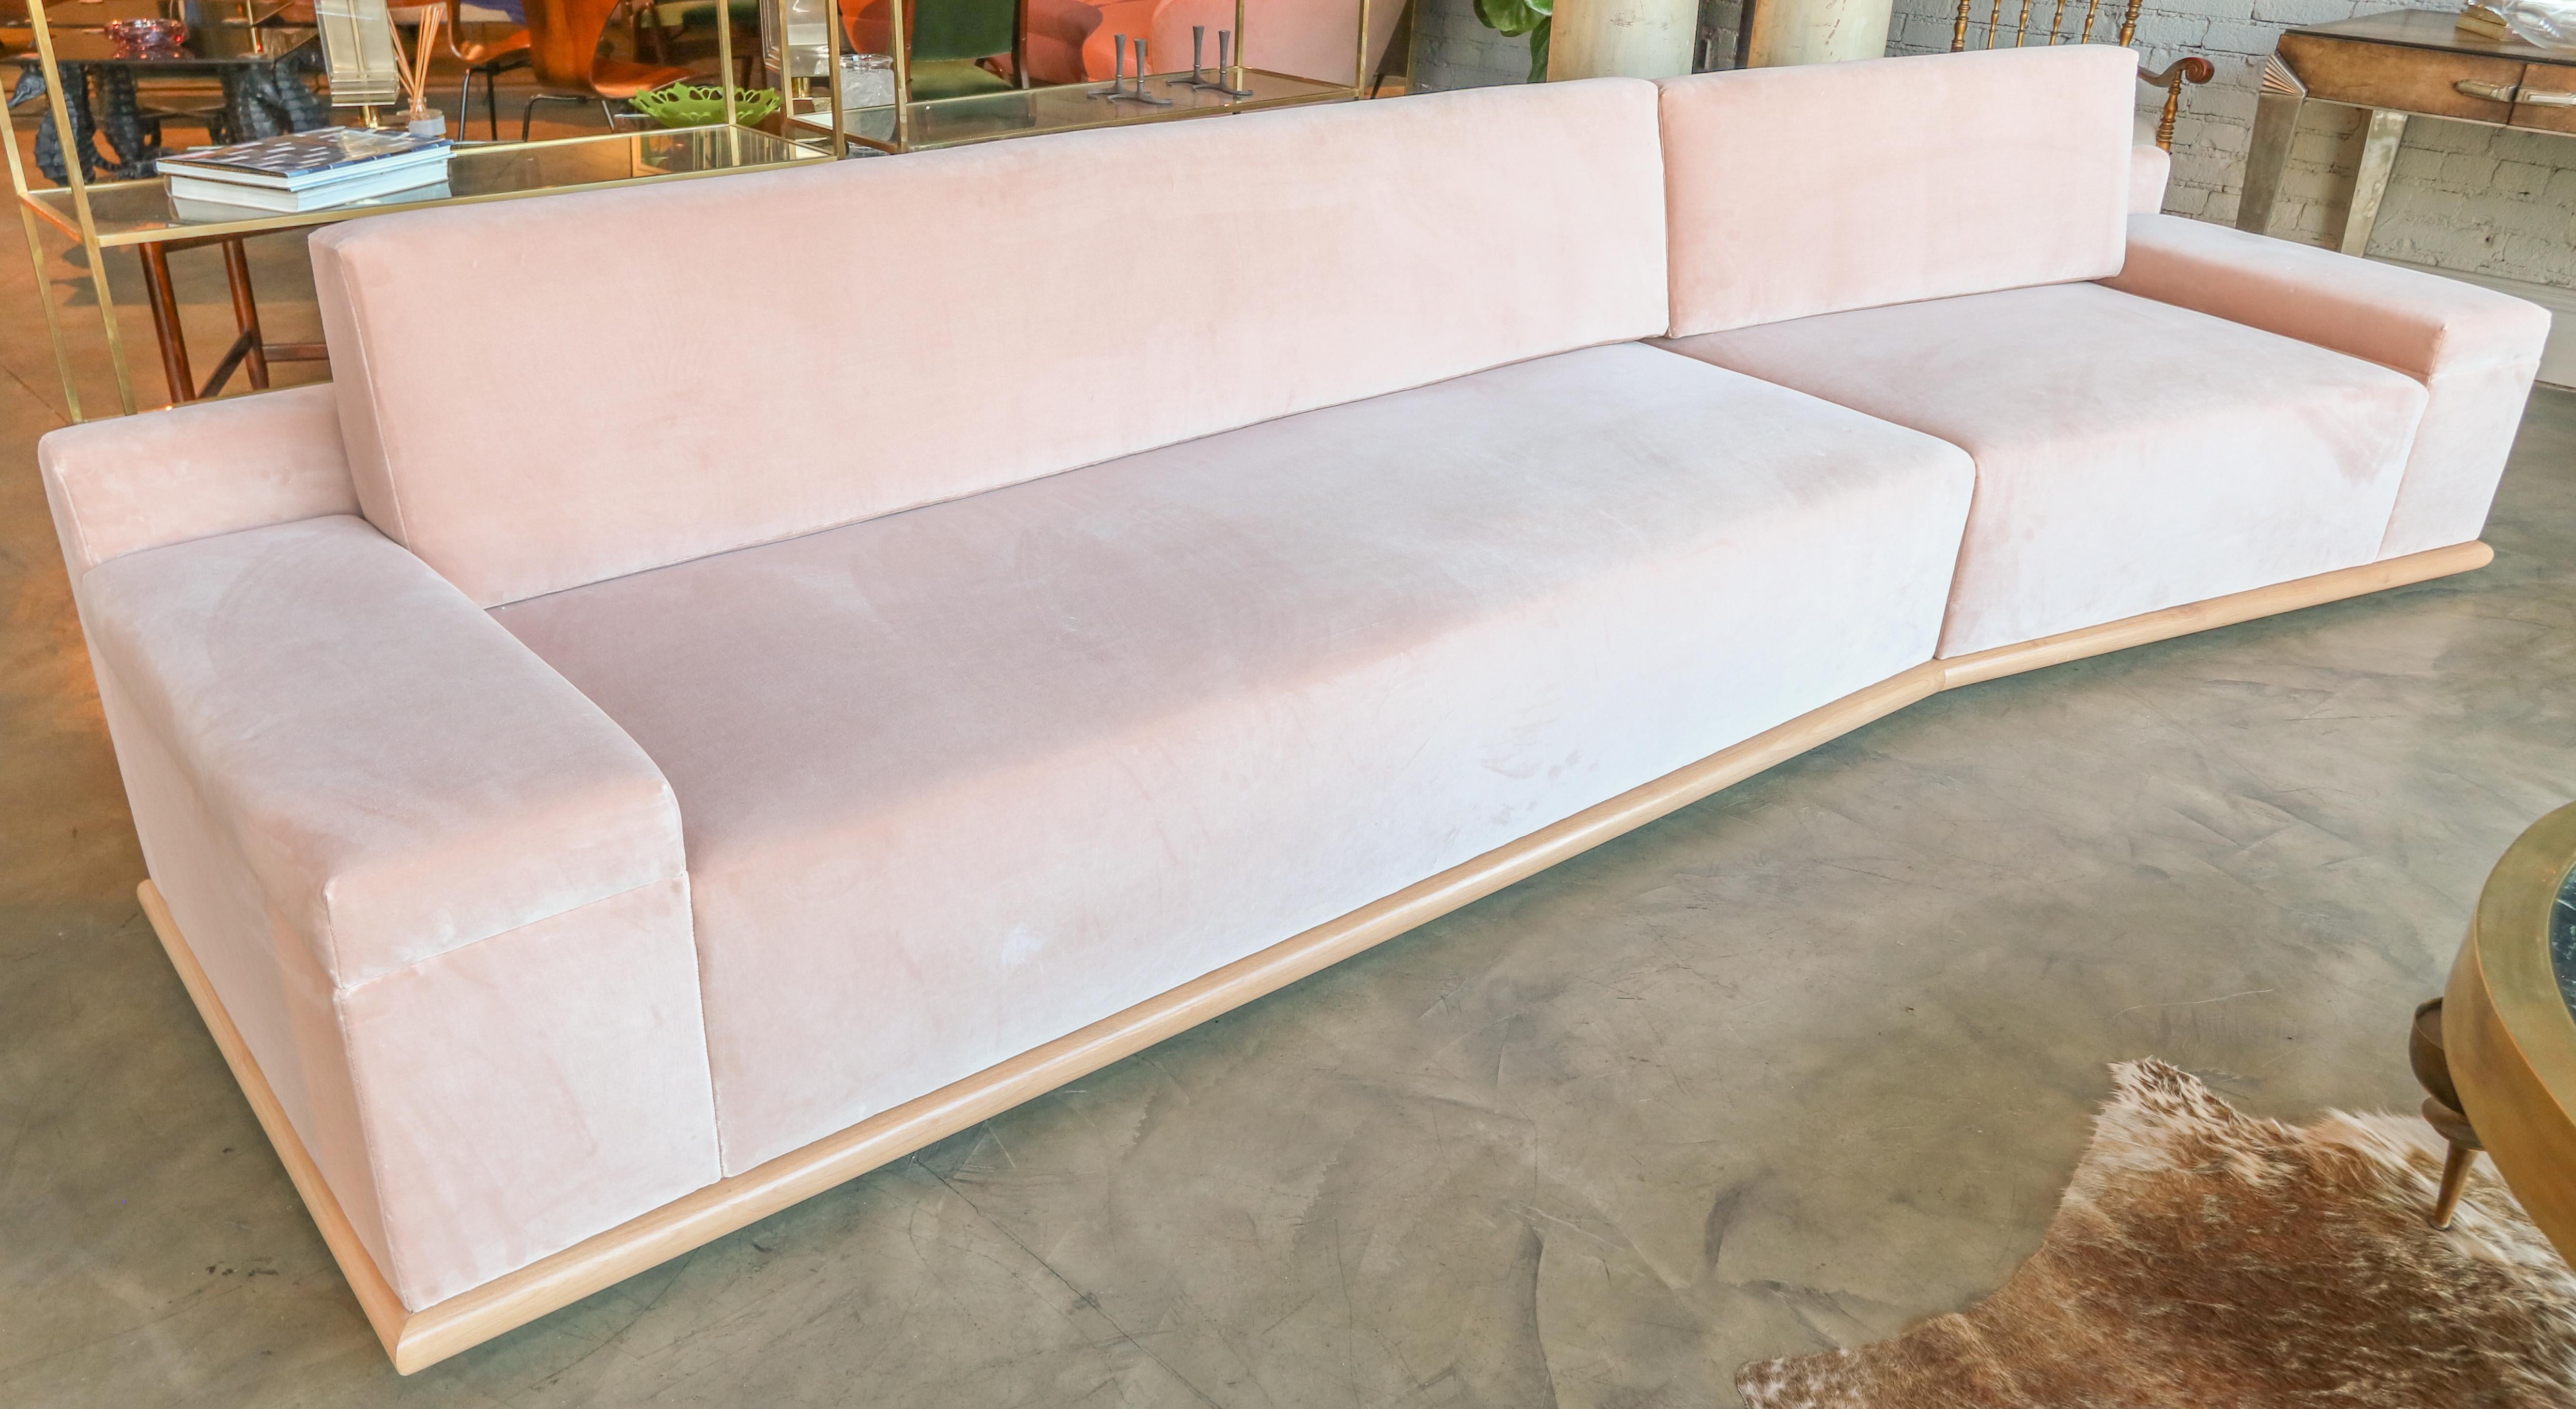 Custom midcentury style sectional sofa in plush velvet in blush pink with maple wood base.  Made in Los Angeles by Adesso Imports. Can be done in different sizes, colors and fabrics.

Measures: Large section 83